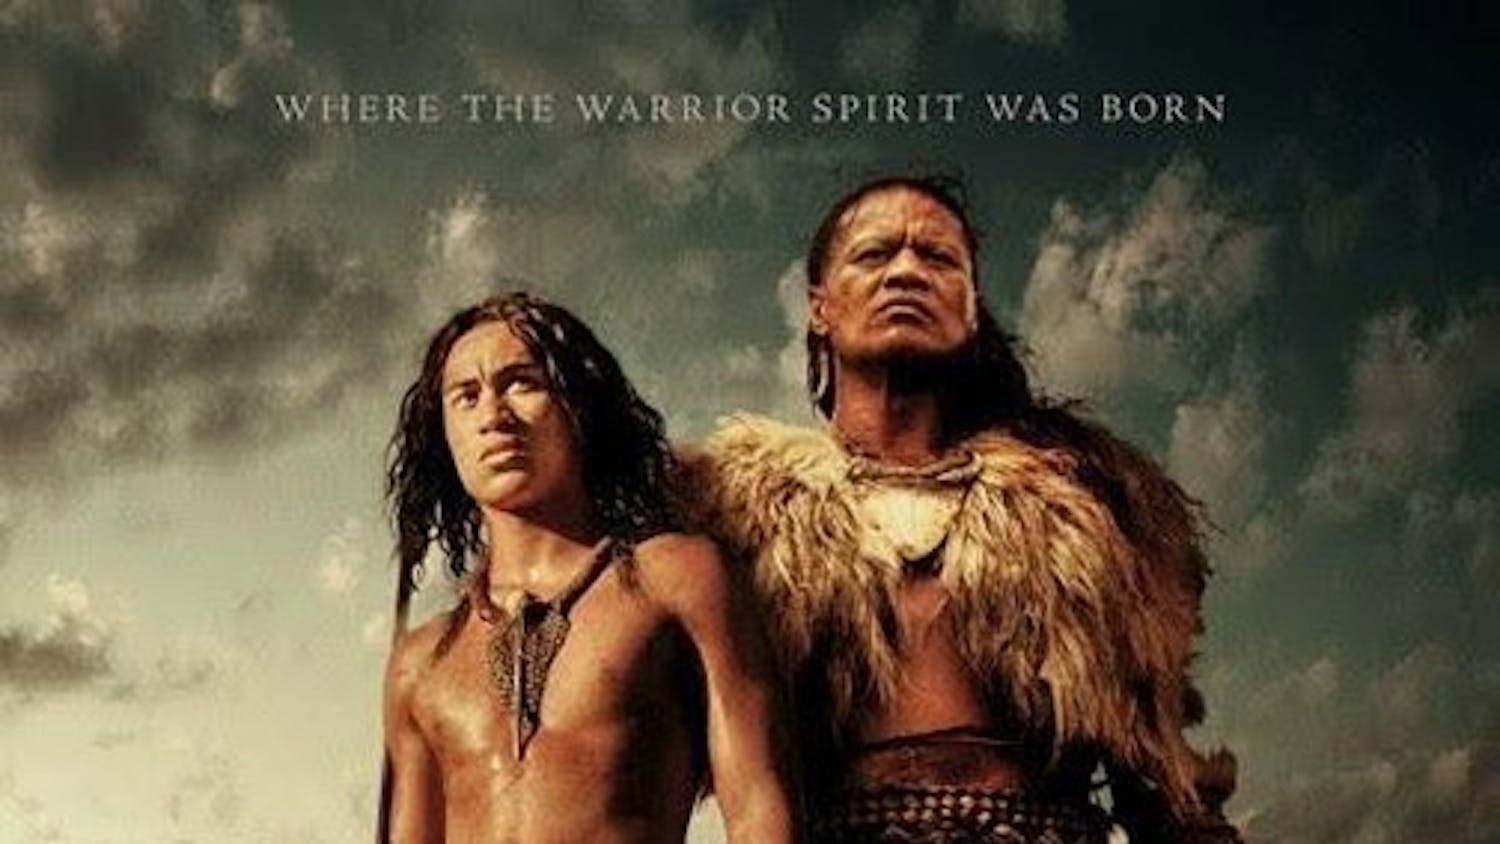 This year's Native American Indian Film Festival of the Southeast will feature several moving films that provide insight into Native American heritage and culture. 